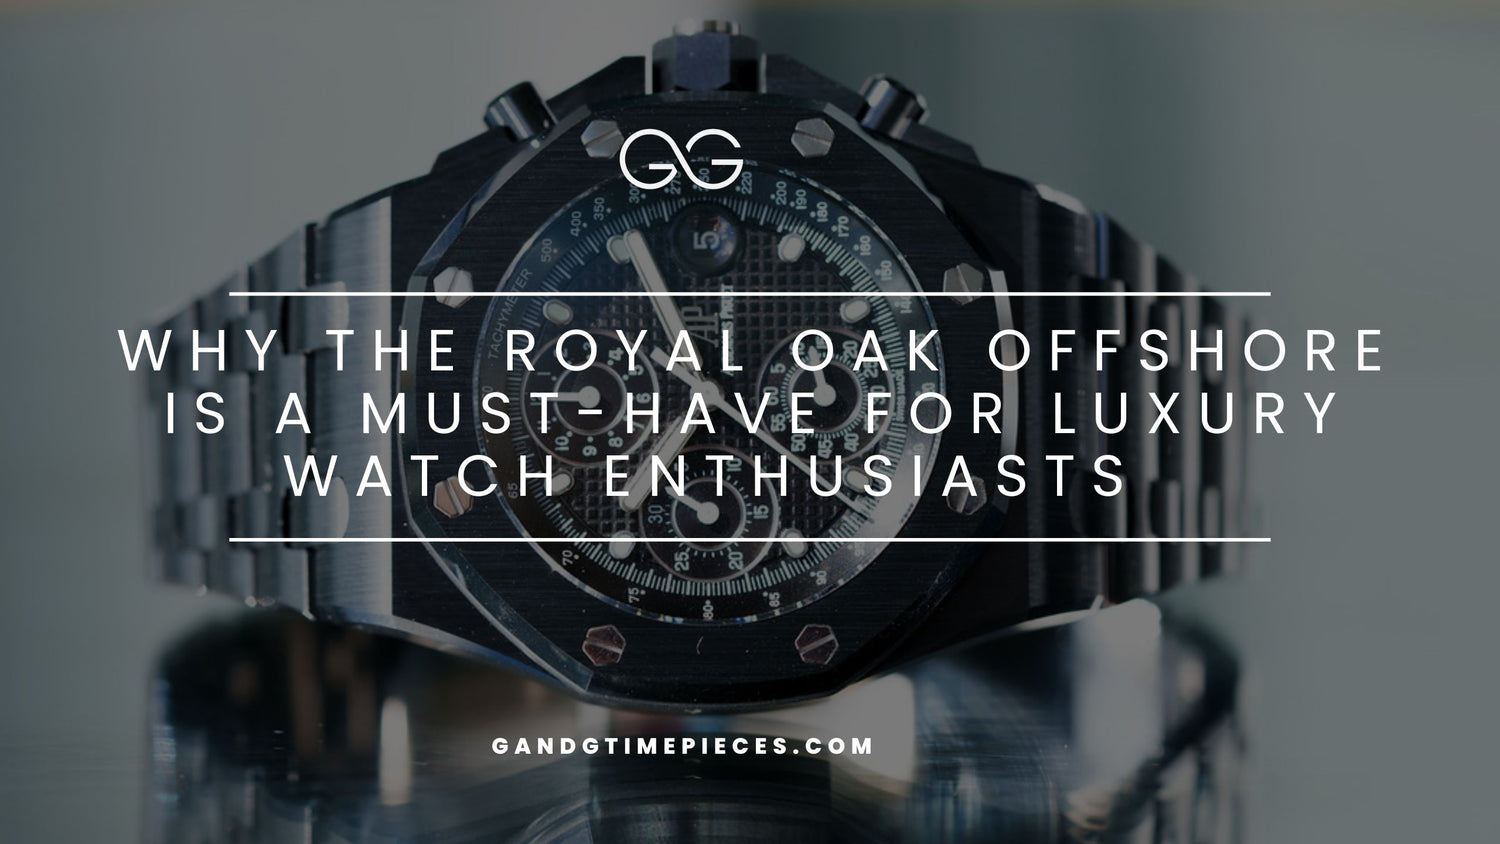 Why the Royal Oak Offshore is a Must-Have for Luxury Watch Enthusiasts